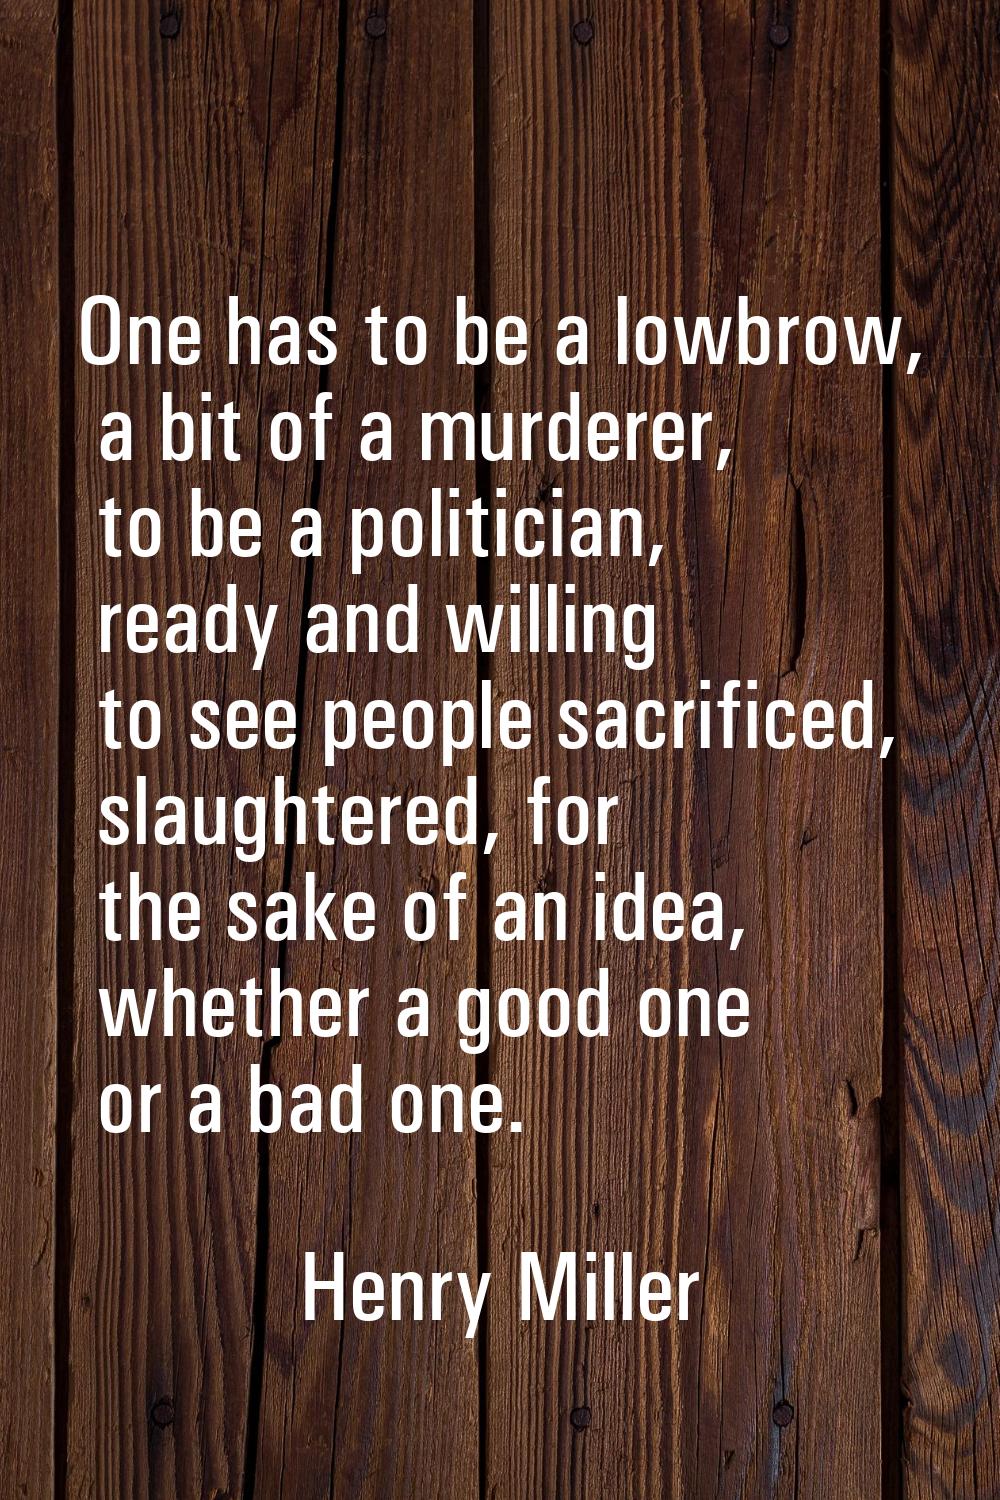 One has to be a lowbrow, a bit of a murderer, to be a politician, ready and willing to see people s